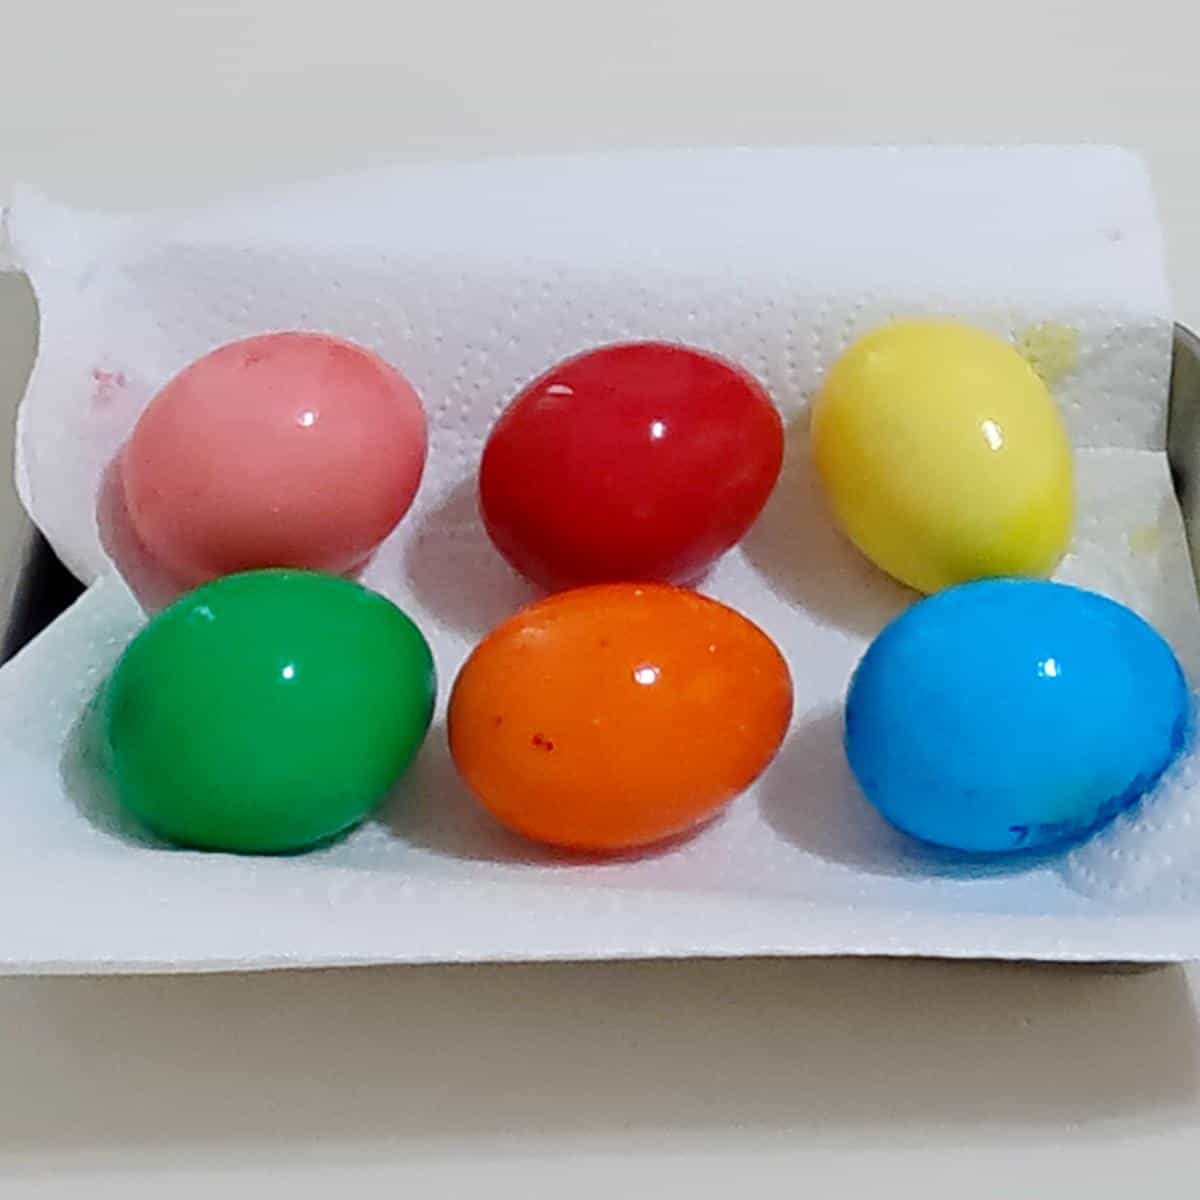 Fresh colored Easter eggs.